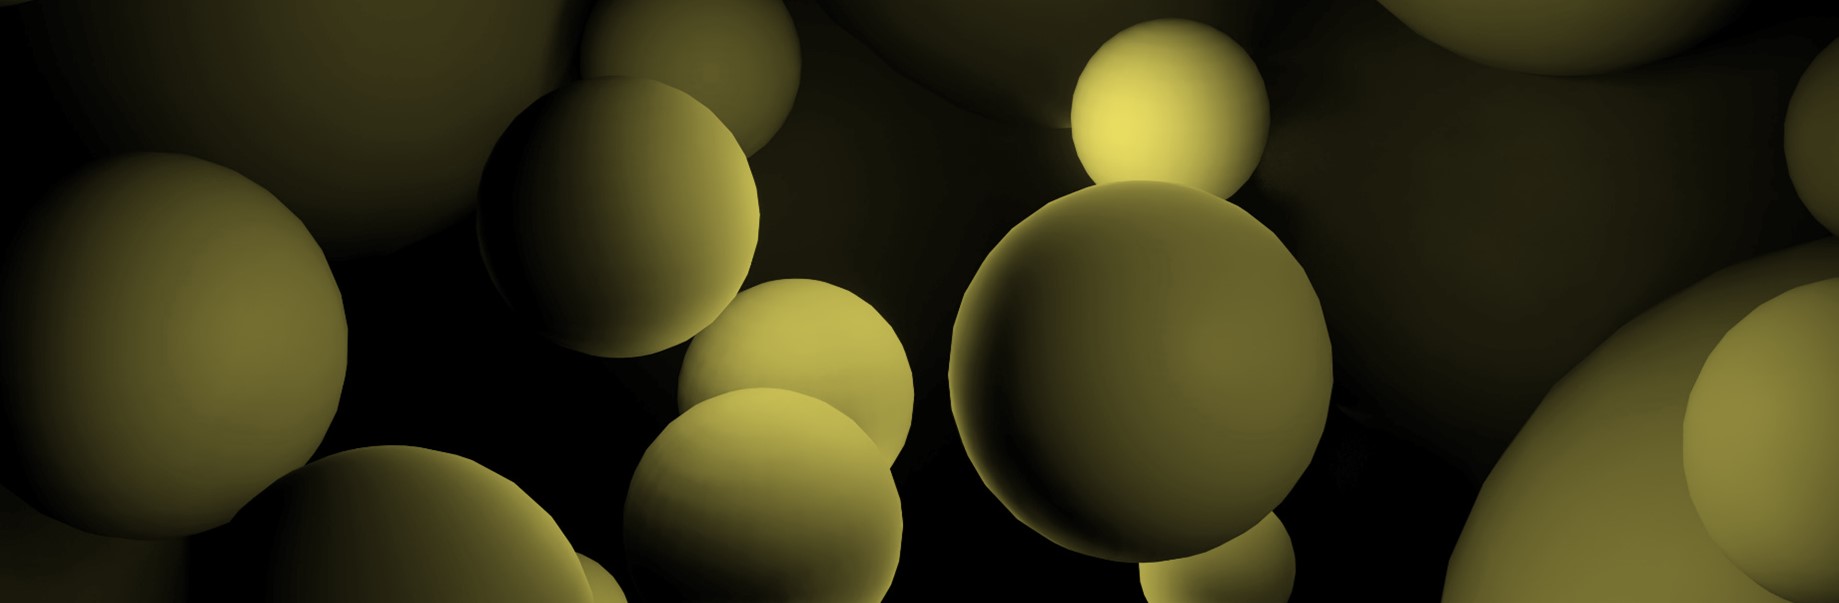 Size distribution of Gold Nanoparticles